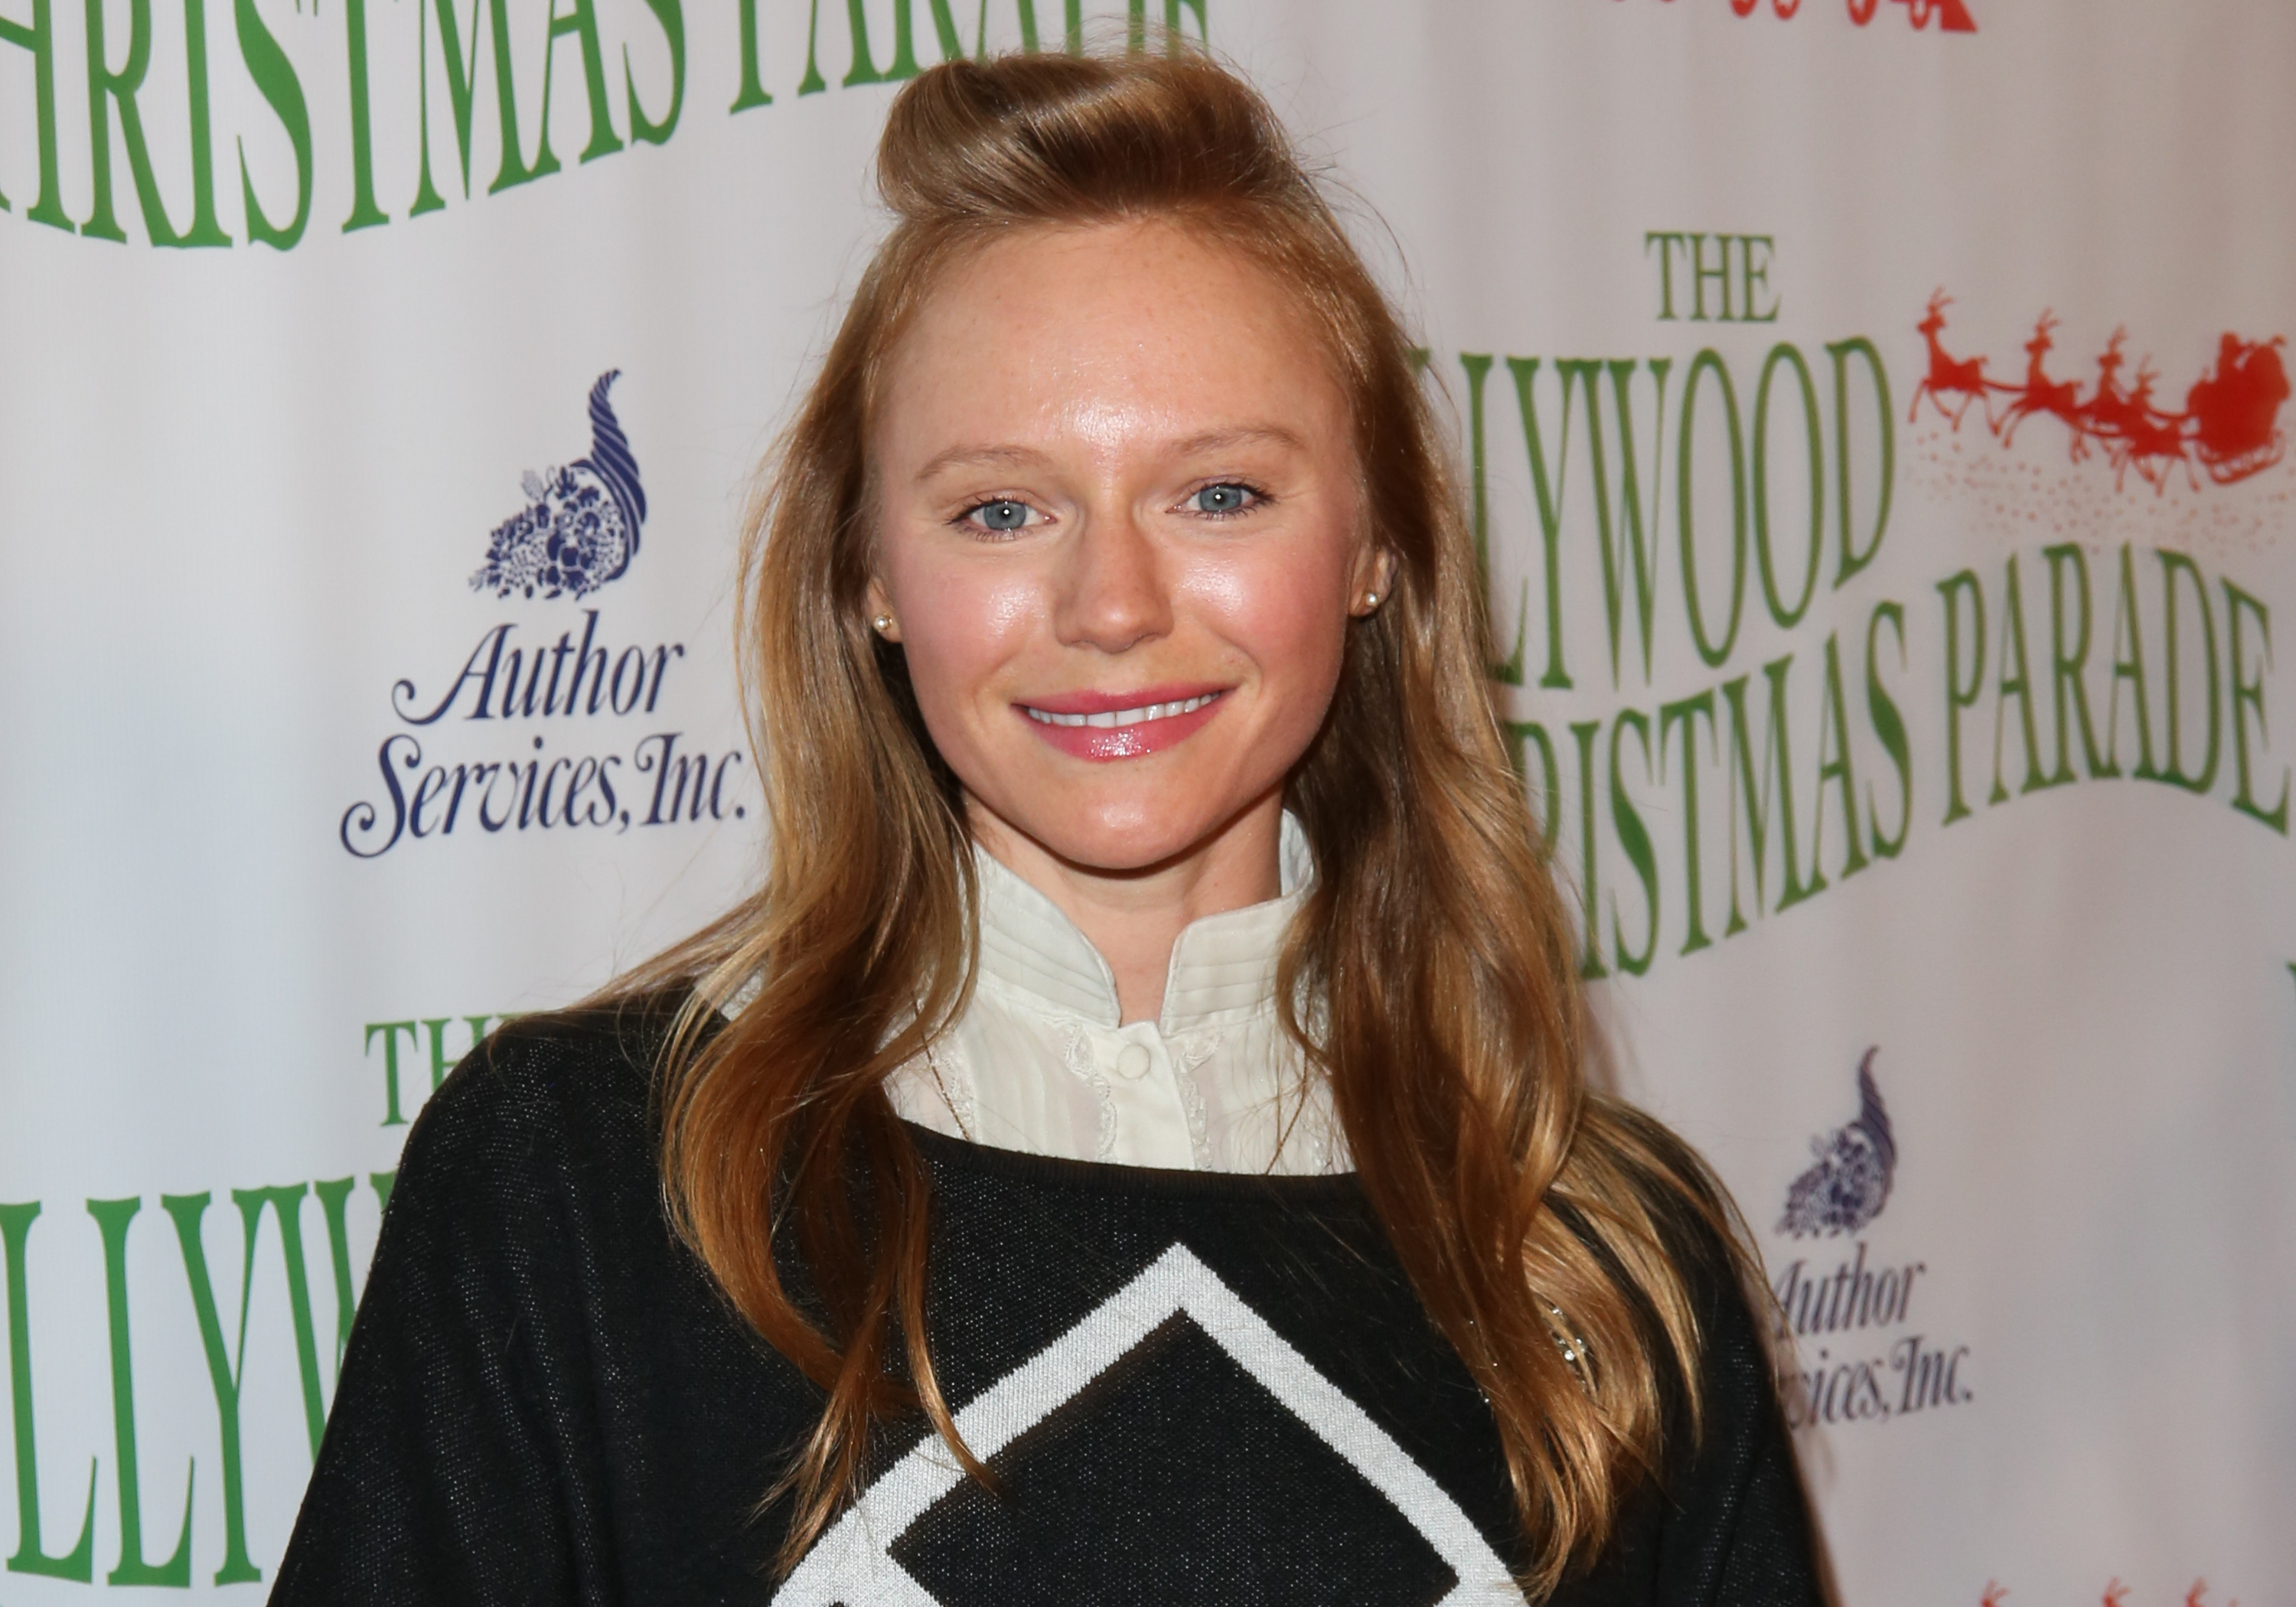 'Days of Our Lives' actor Marci Miller wearing a black and white sweater.